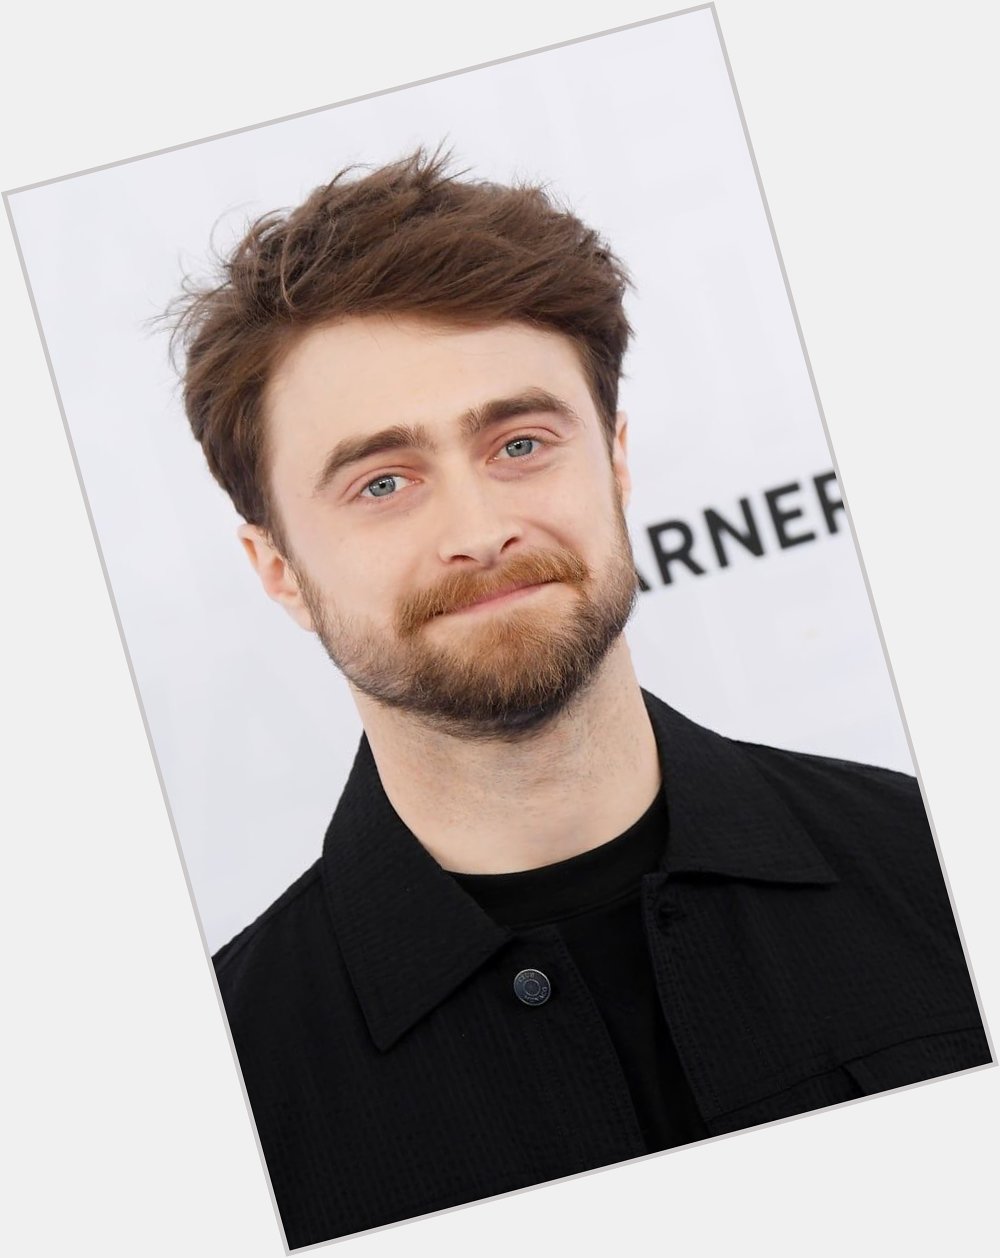 Happy birthday to Daniel Radcliffe,
thank you for being the best harry potter and giving me a great childhood 